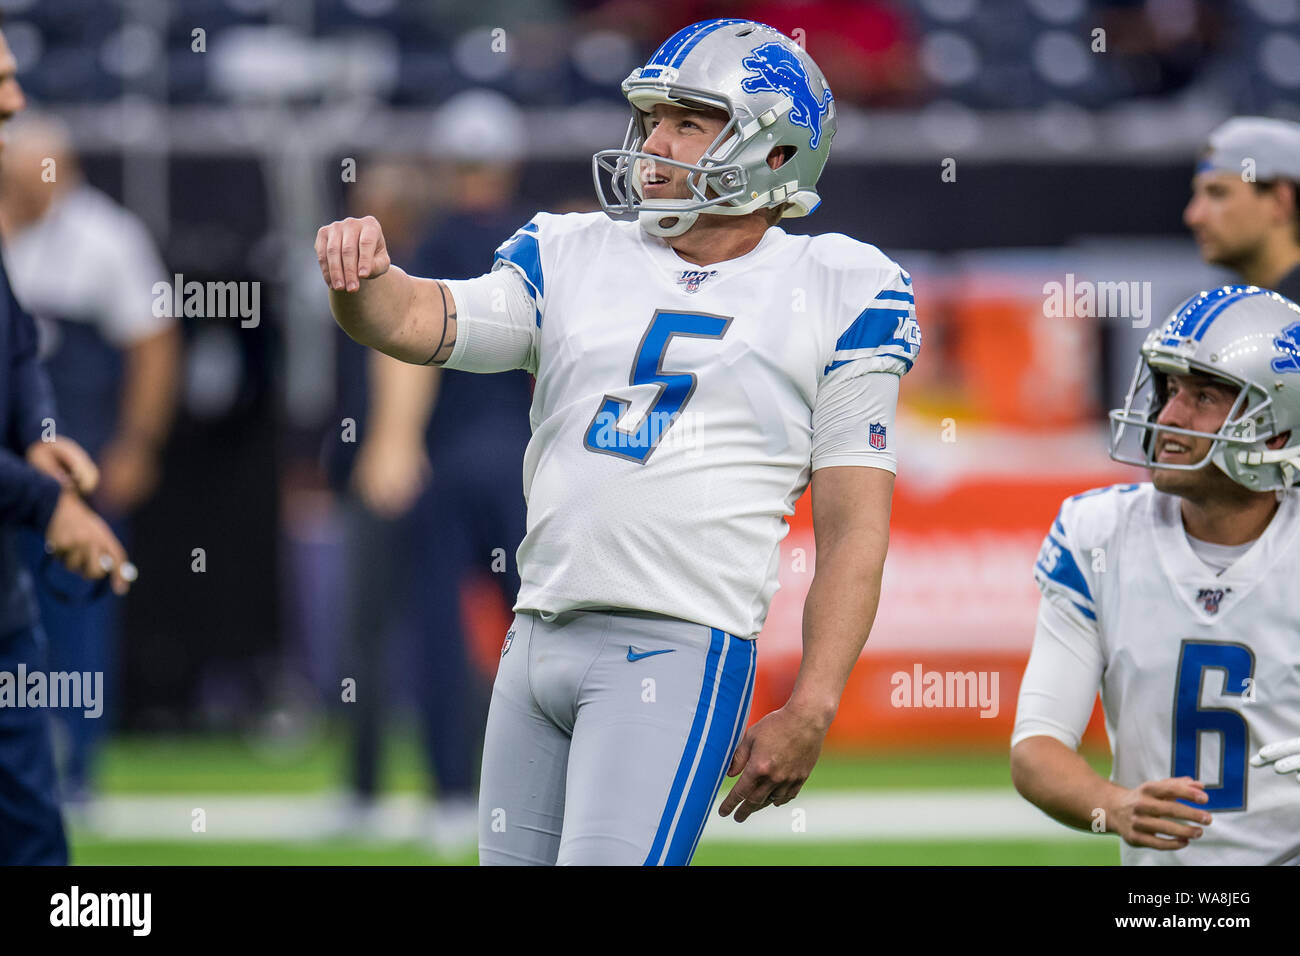 Matt Prater High Resolution Stock Photography and Images - Alamy